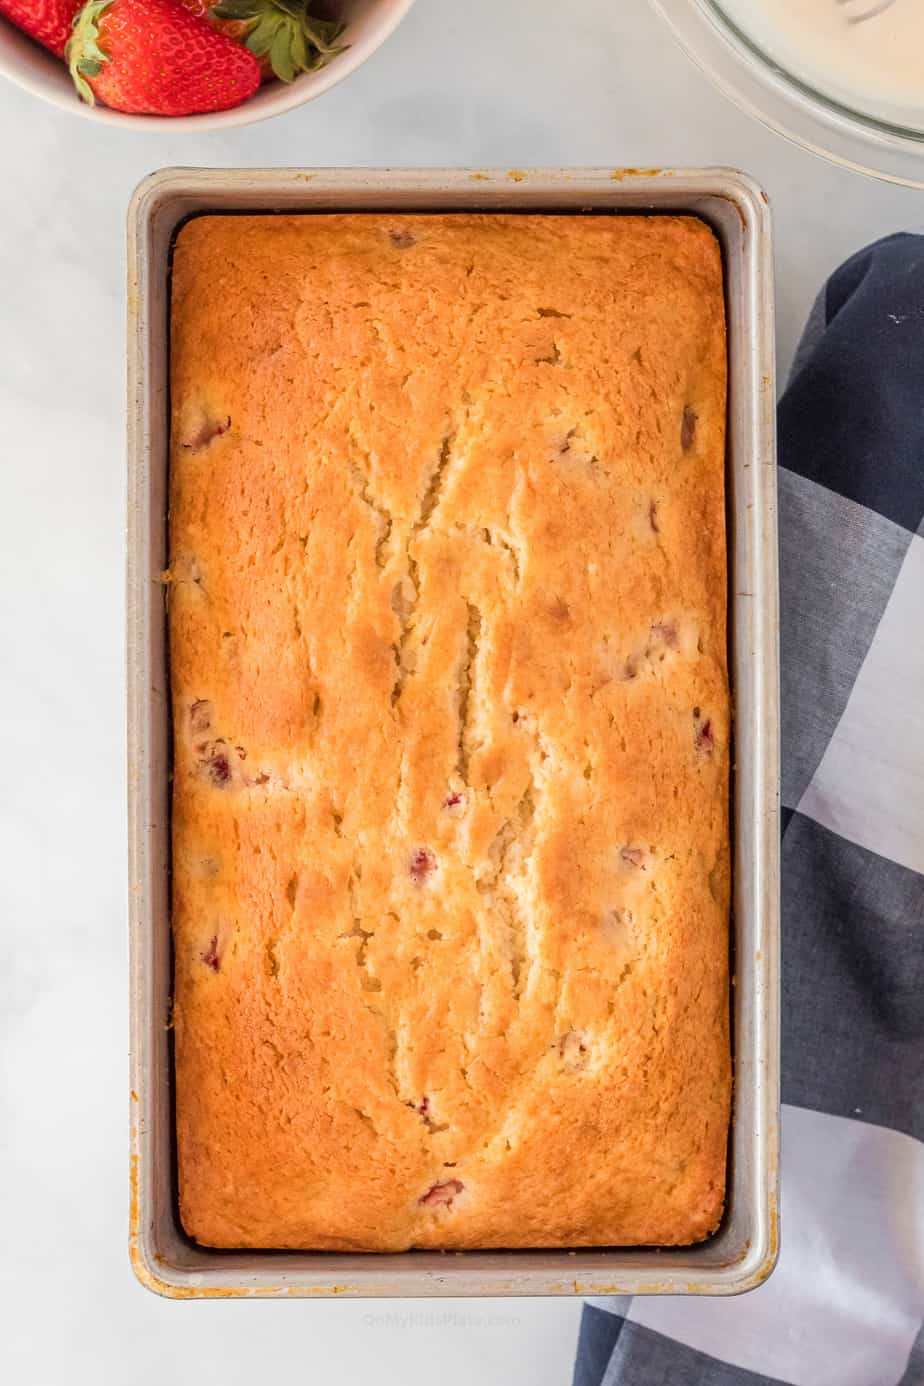 strawberry bread baked in loaf pan from overhead